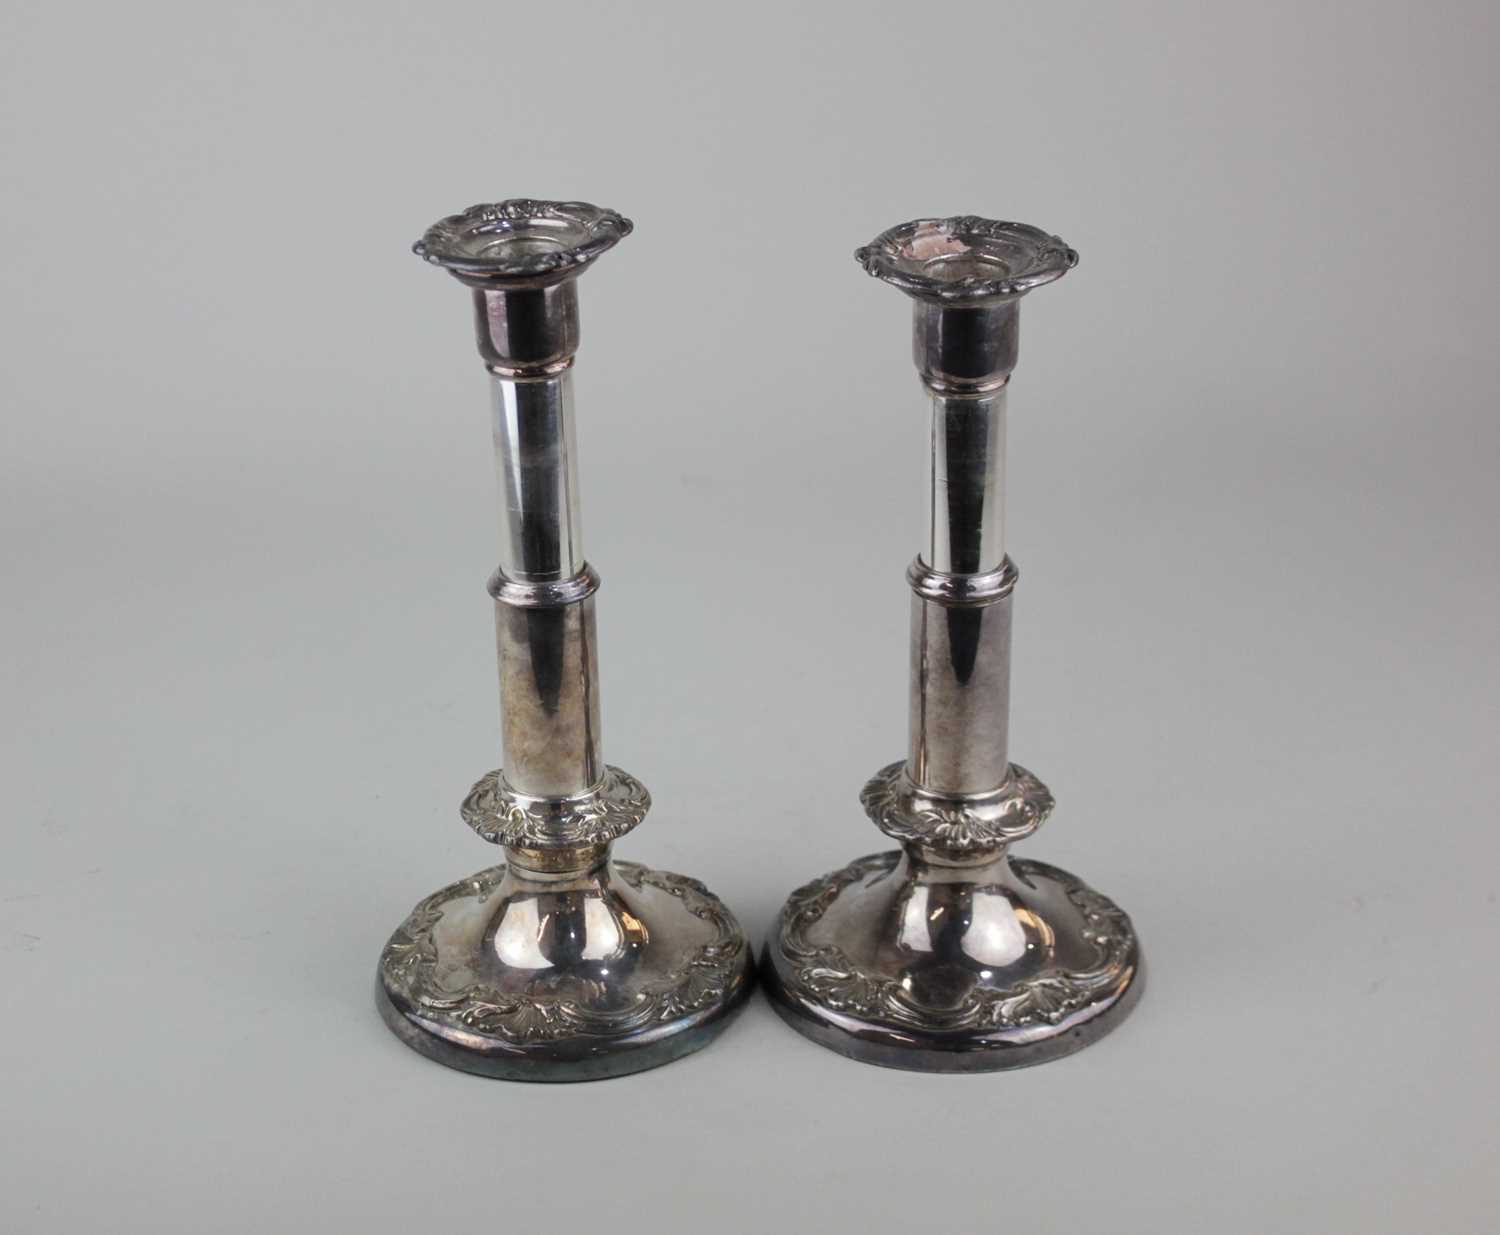 A pair of silver plated candlesticks possibly Irish with removable drip trays and single